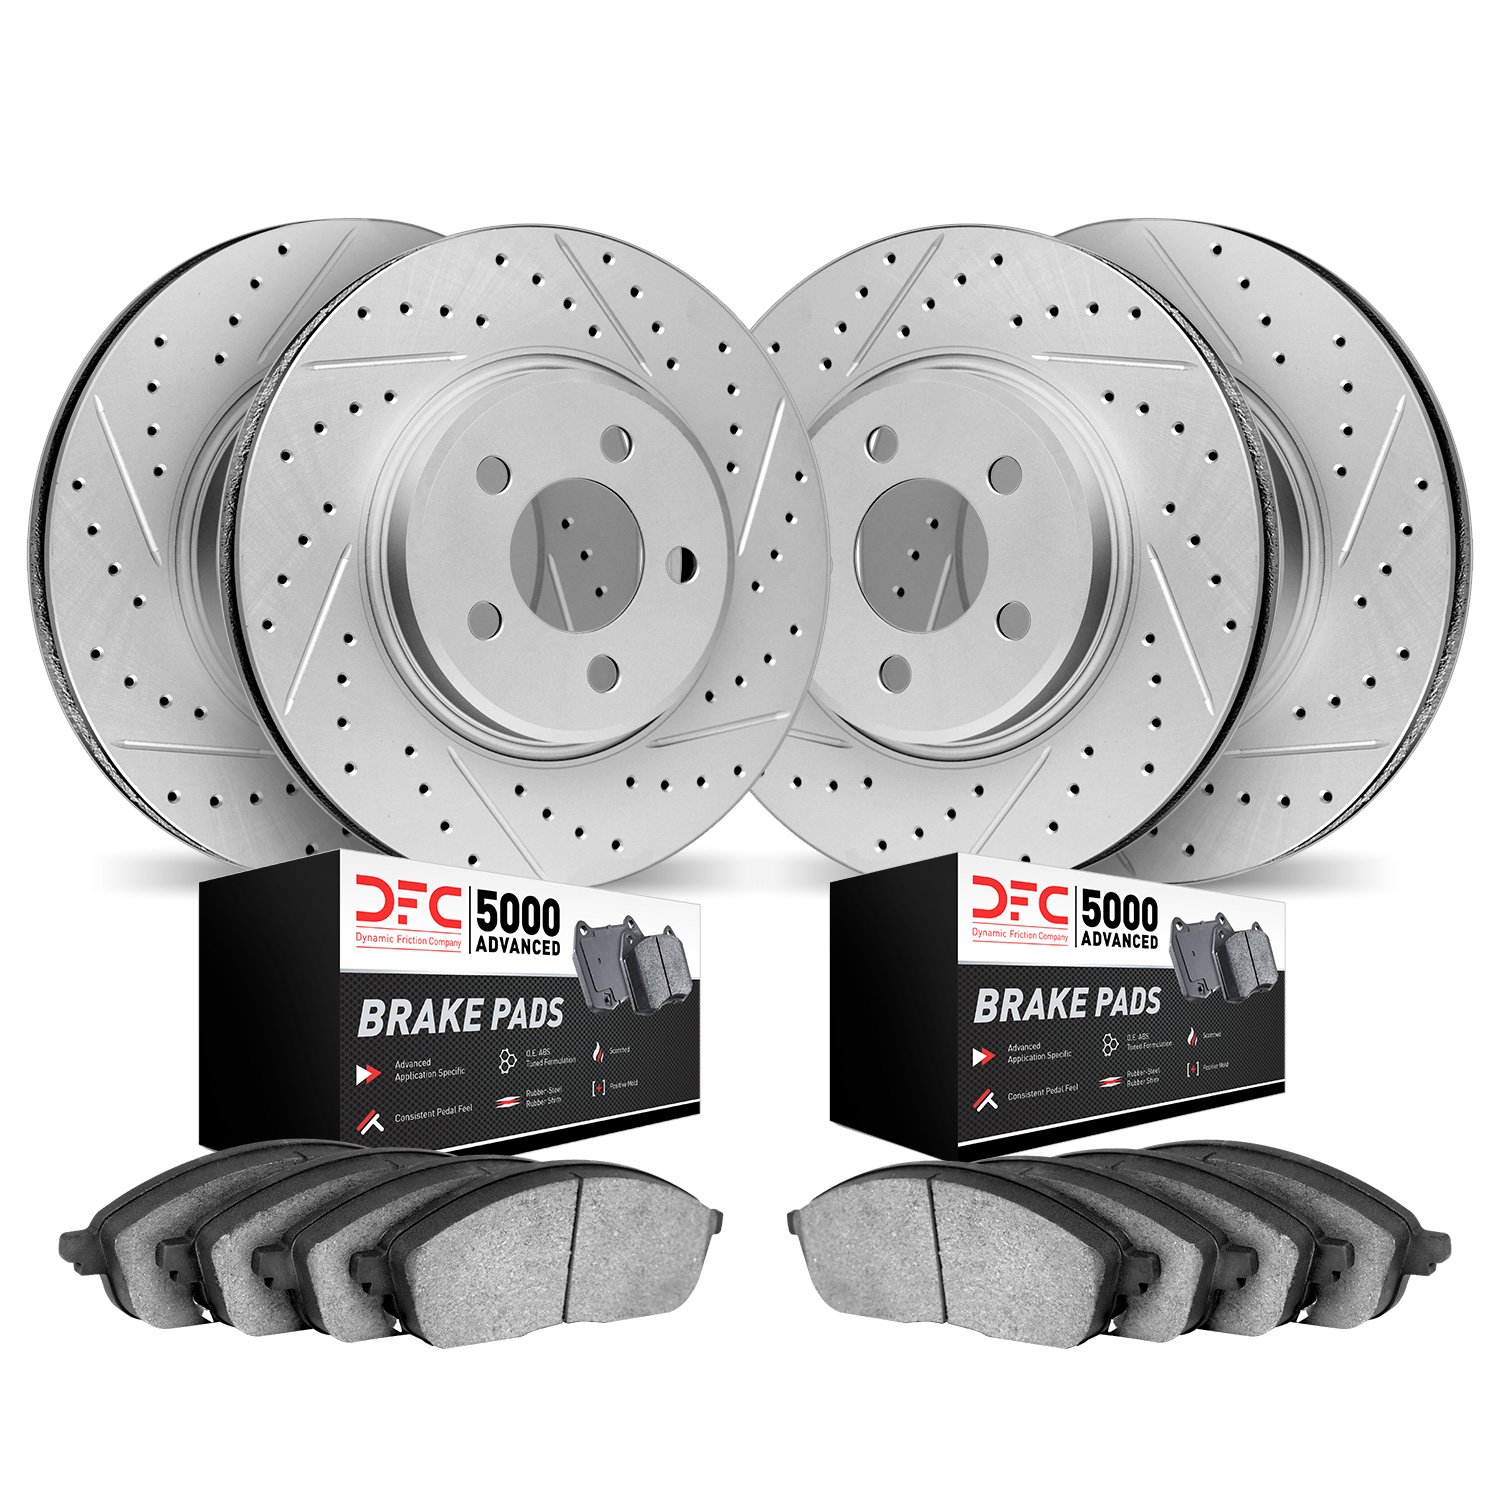 2504-54200 Geoperformance Drilled/Slotted Rotors w/5000 Advanced Brake Pads Kit, 2005-2014 Ford/Lincoln/Mercury/Mazda, Position: